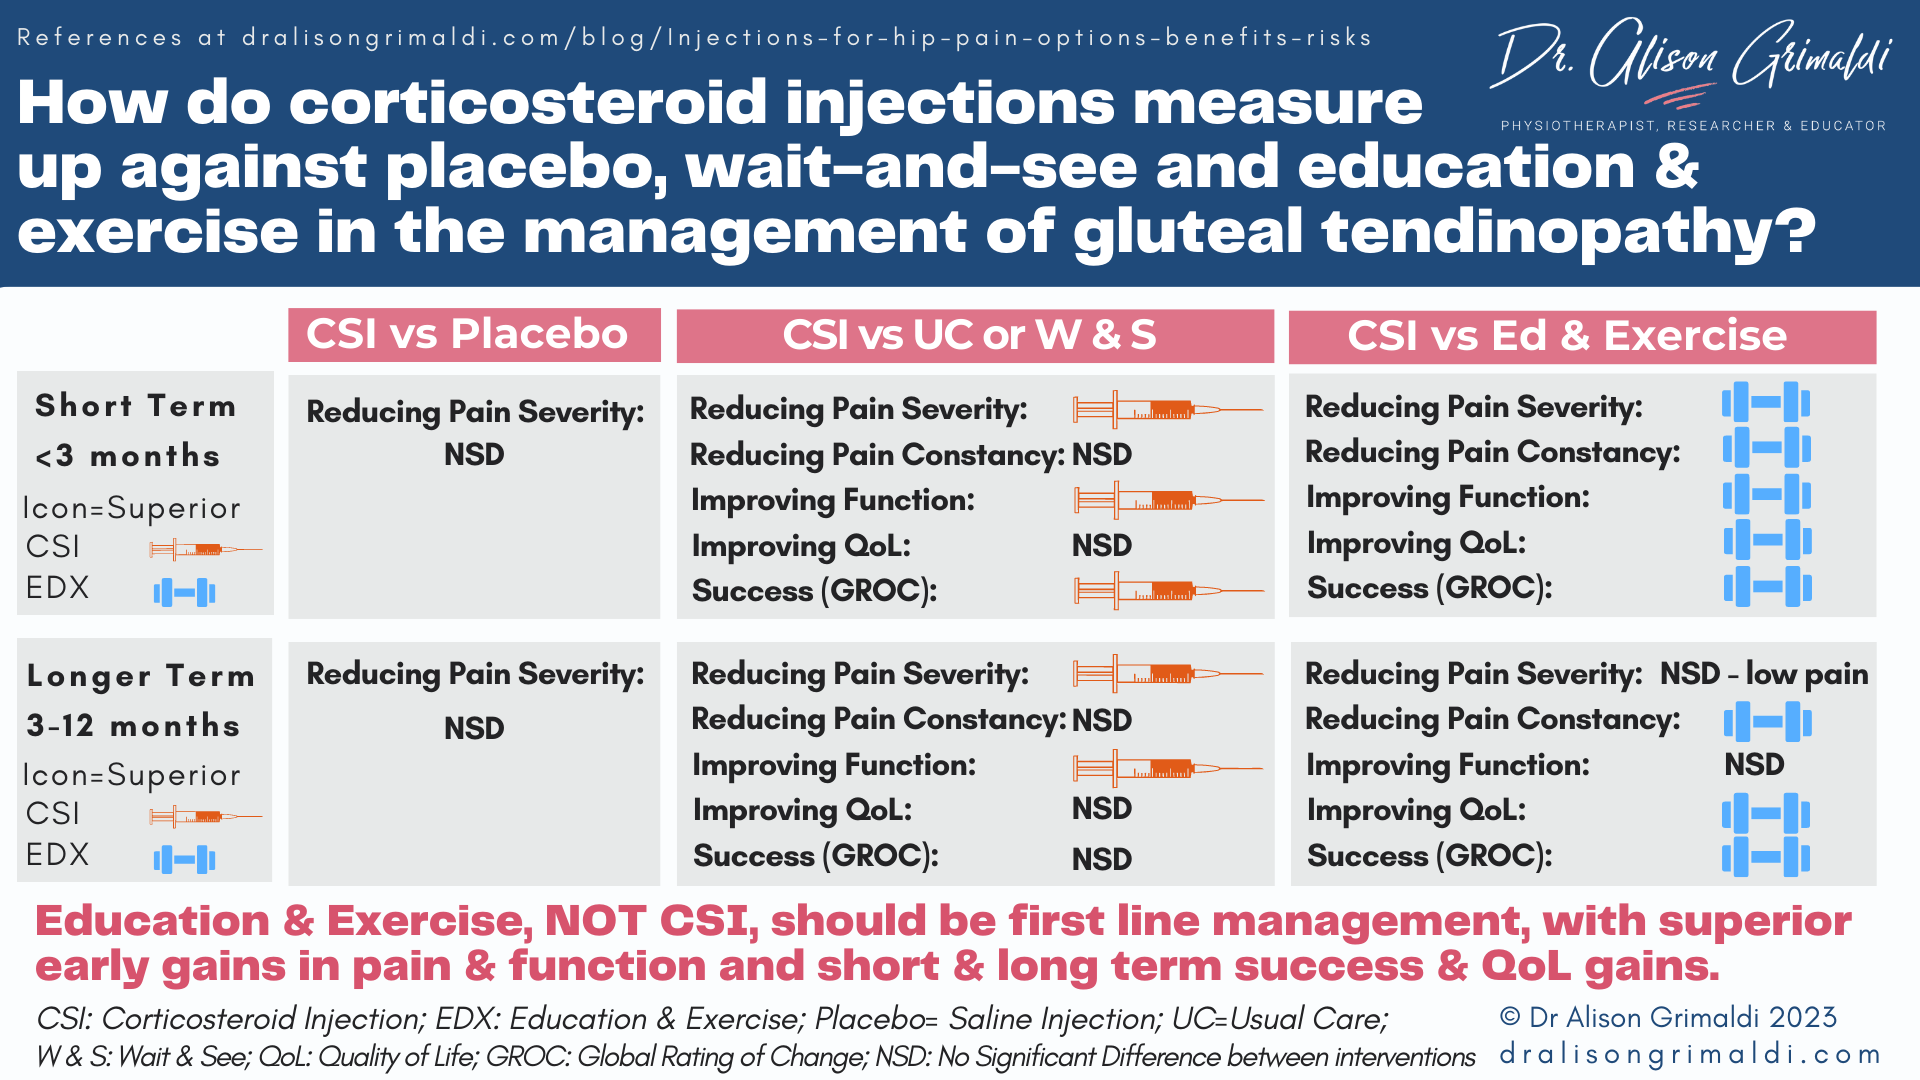 How do corticosteroid injections measure up against placebo, wait-and-see and education & exercise in the management of gluteal tendinopathy?